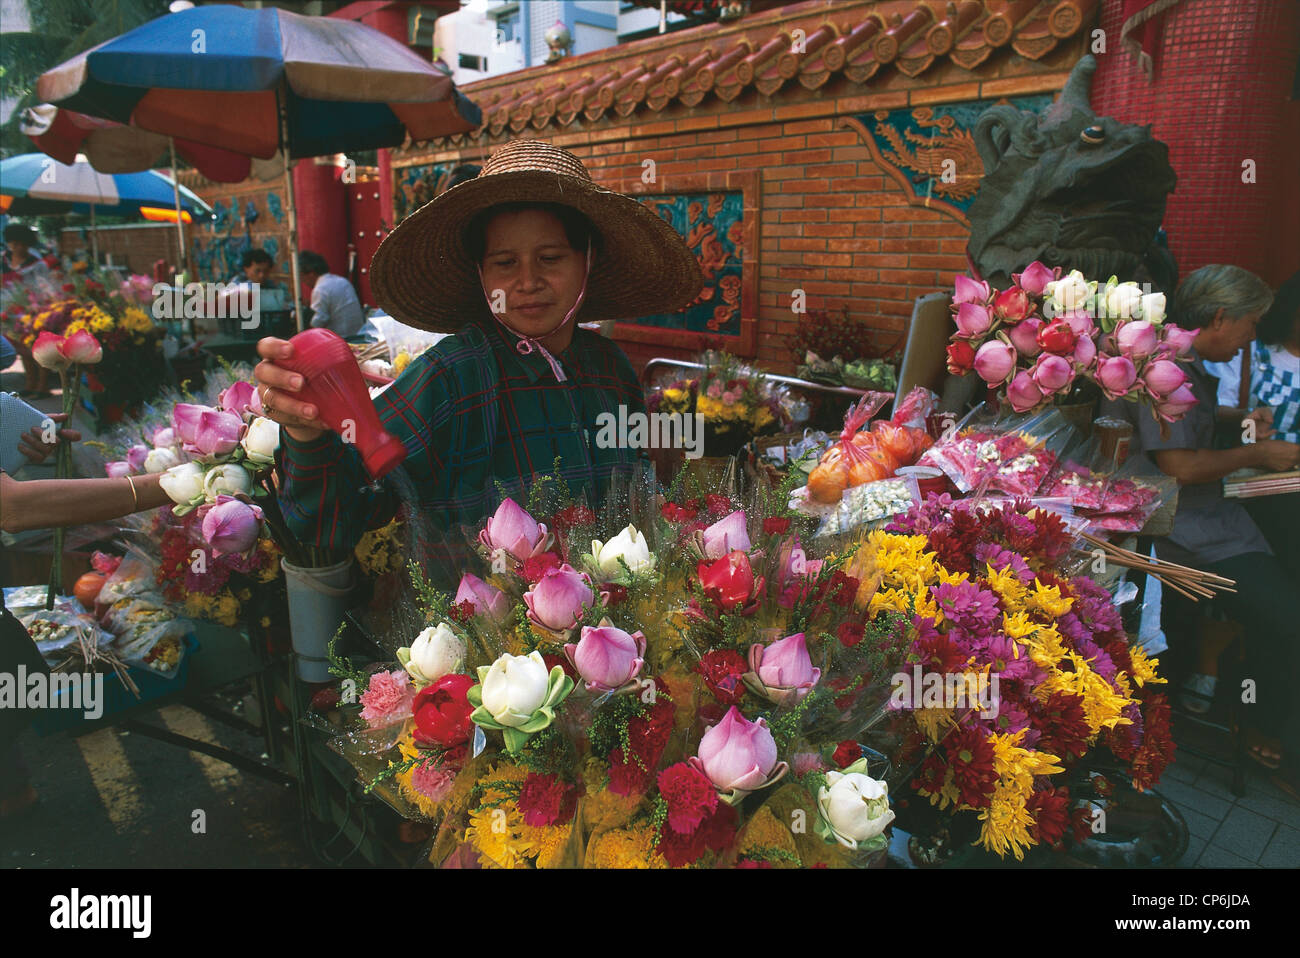 Republic of Singapore - Singapore. The stand of a woman selling lotus flowers Stock Photo